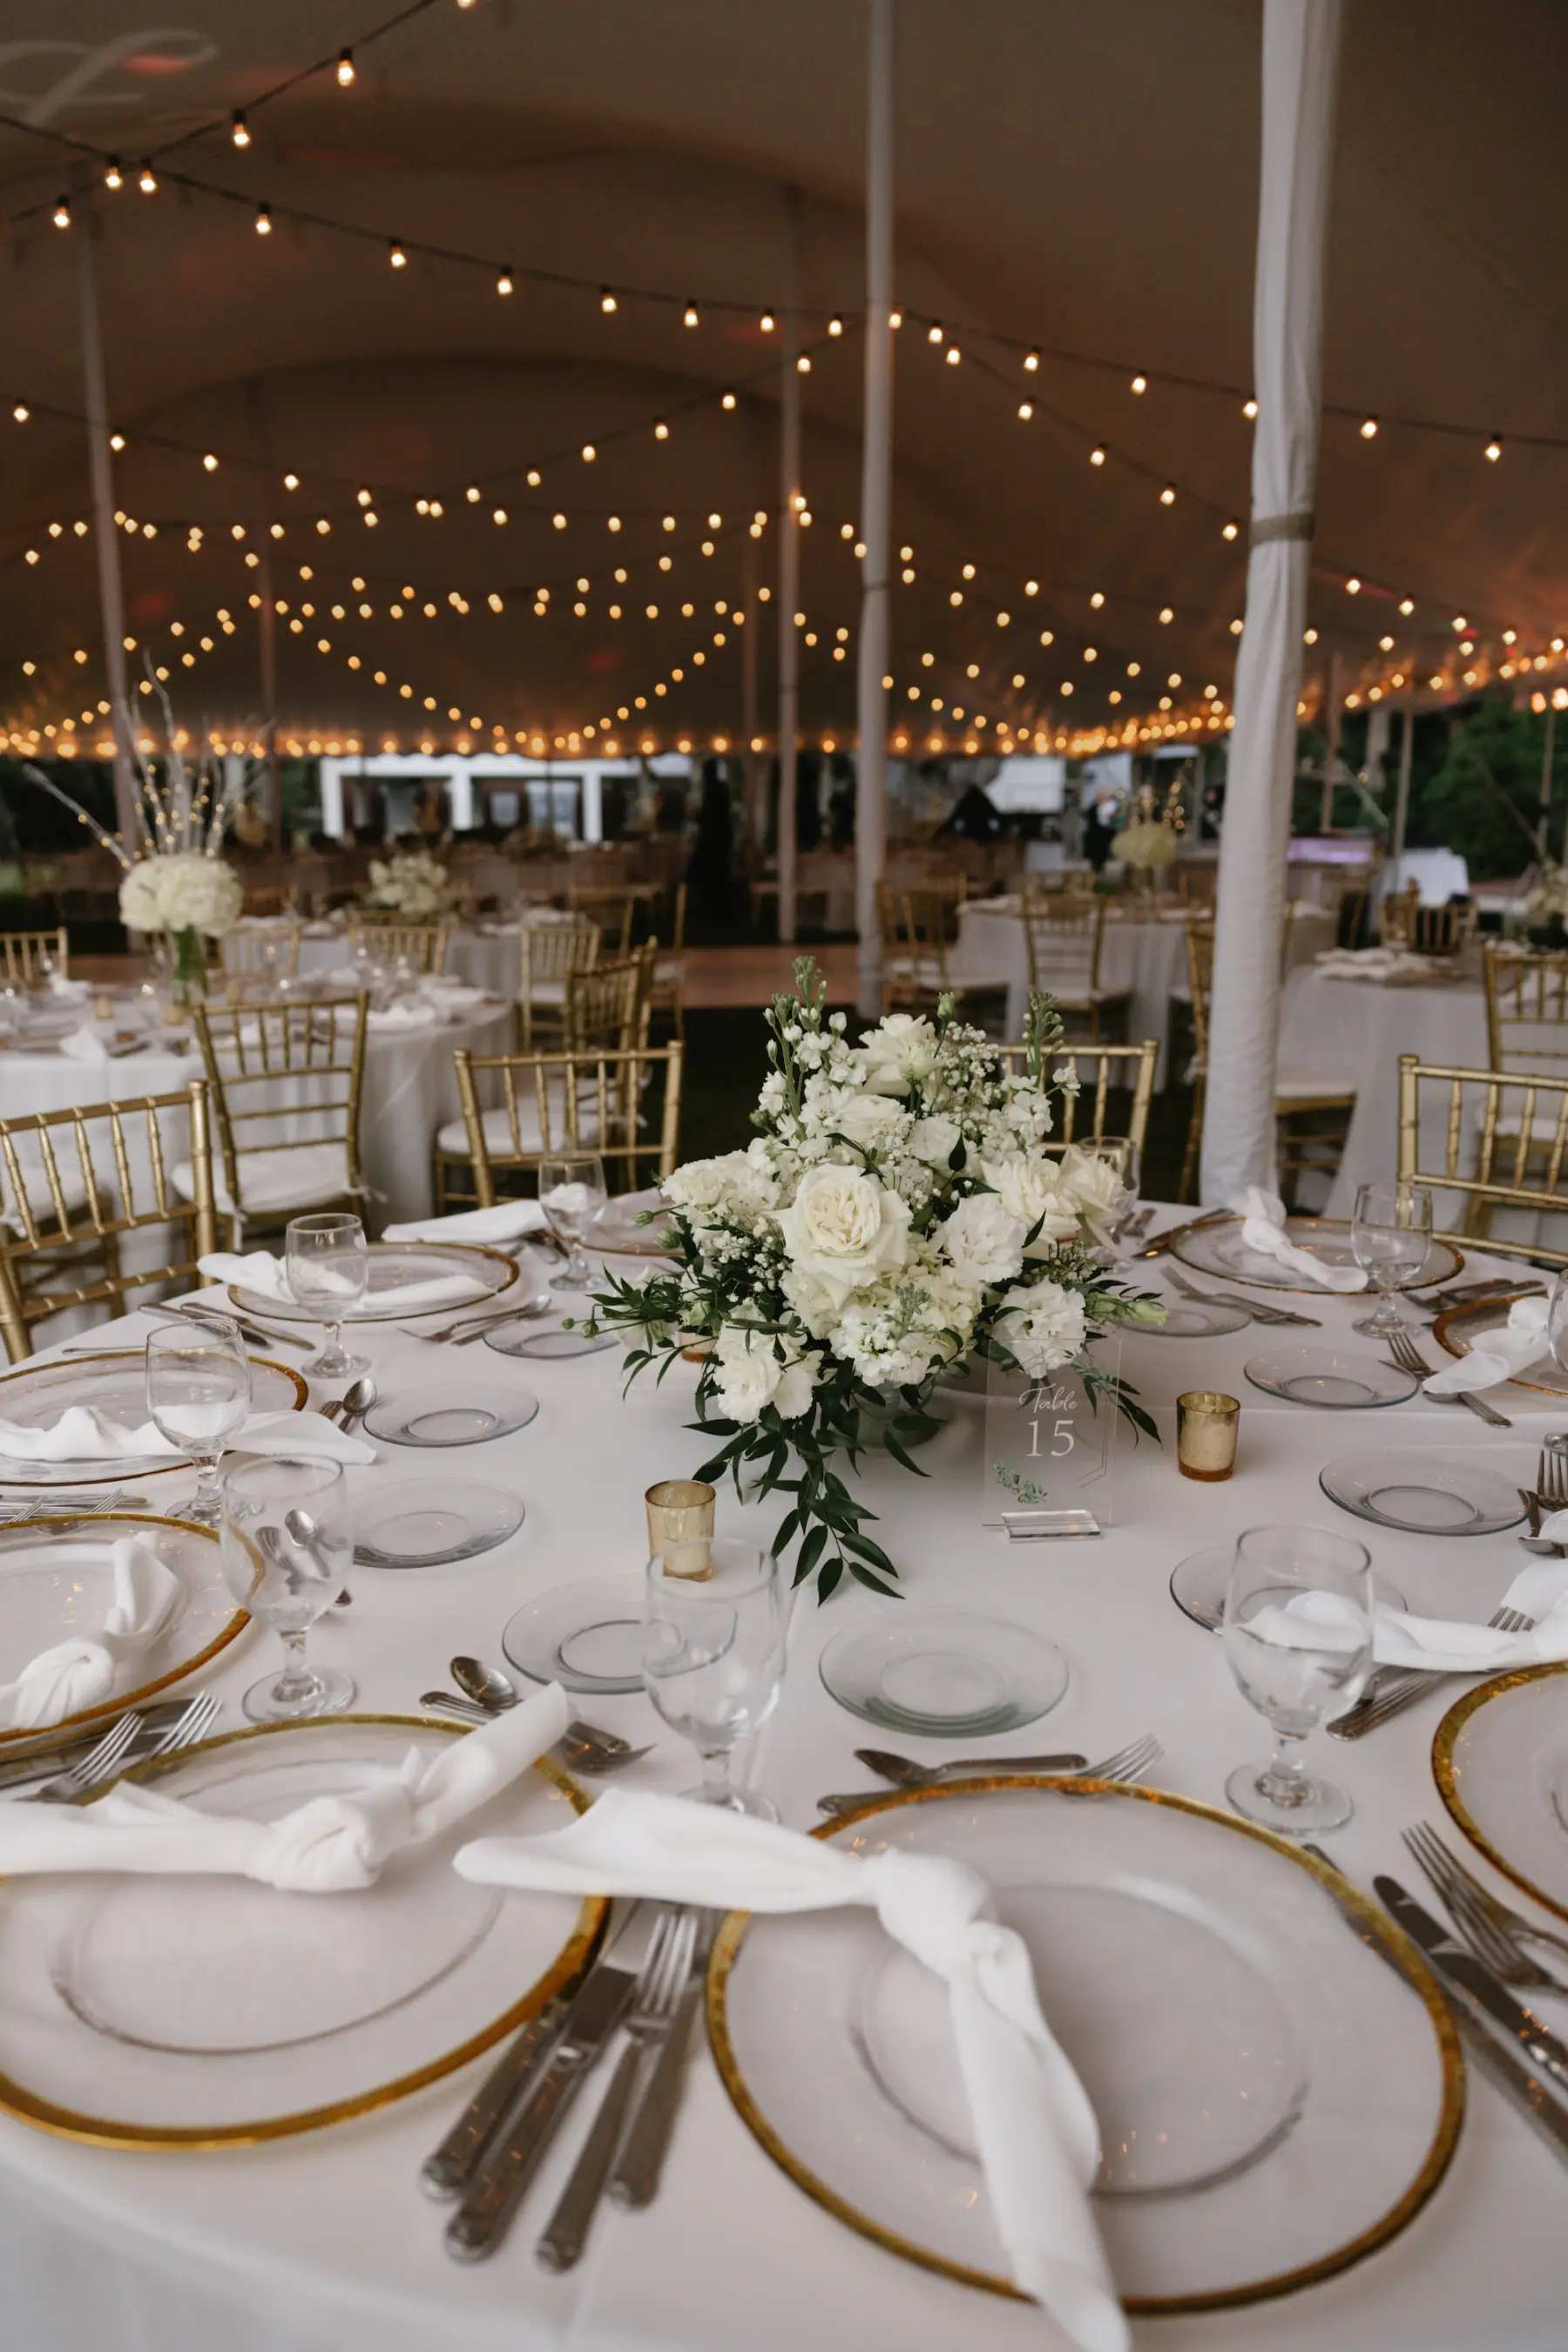 Classic White and Gold Wedding Reception Inspiration | White Roses, Baby's Breath, Hydrangea, and Greenery Centerpiece Decor Ideas | Tampa Bay Florist Beneva Florals